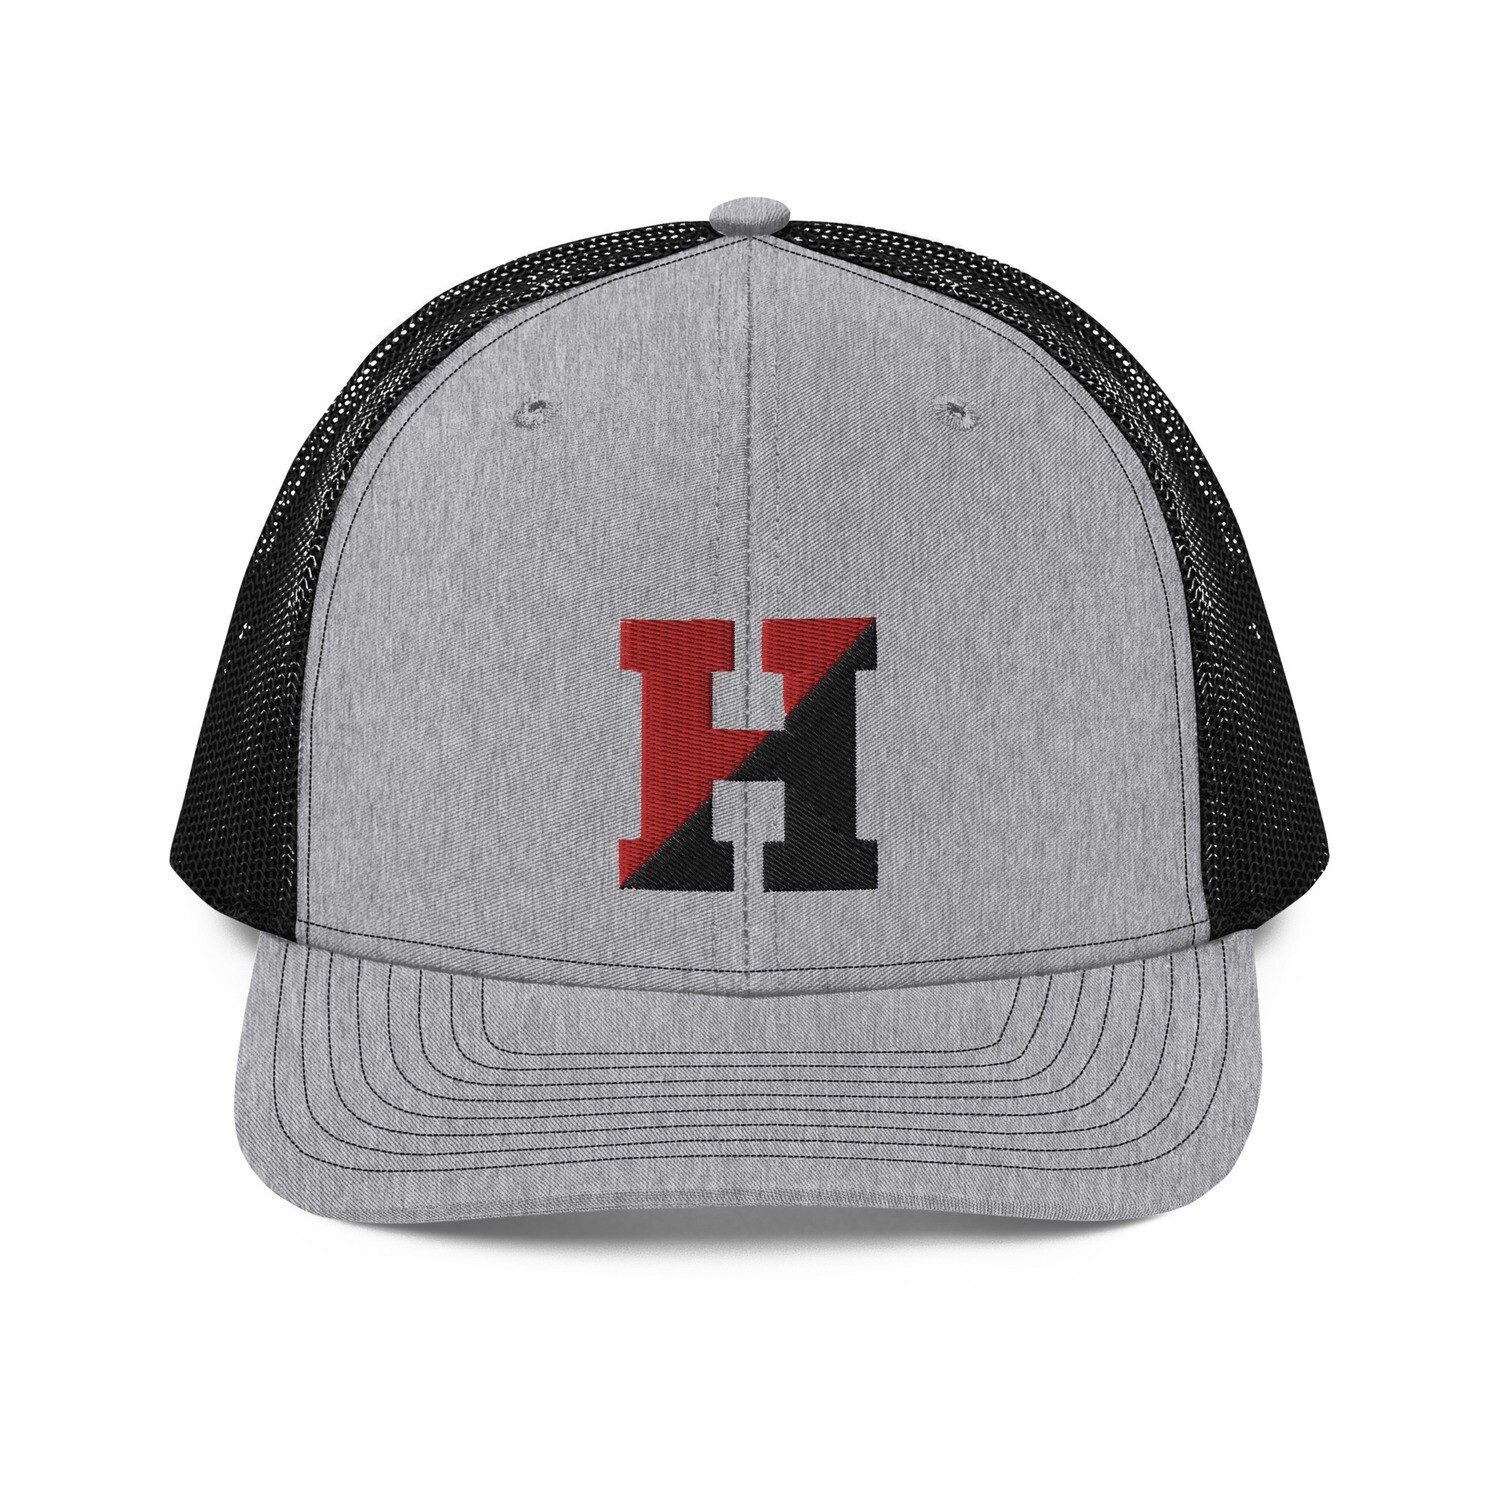 Hempfield "The H" Embroidered Snap Back Trucker Hat